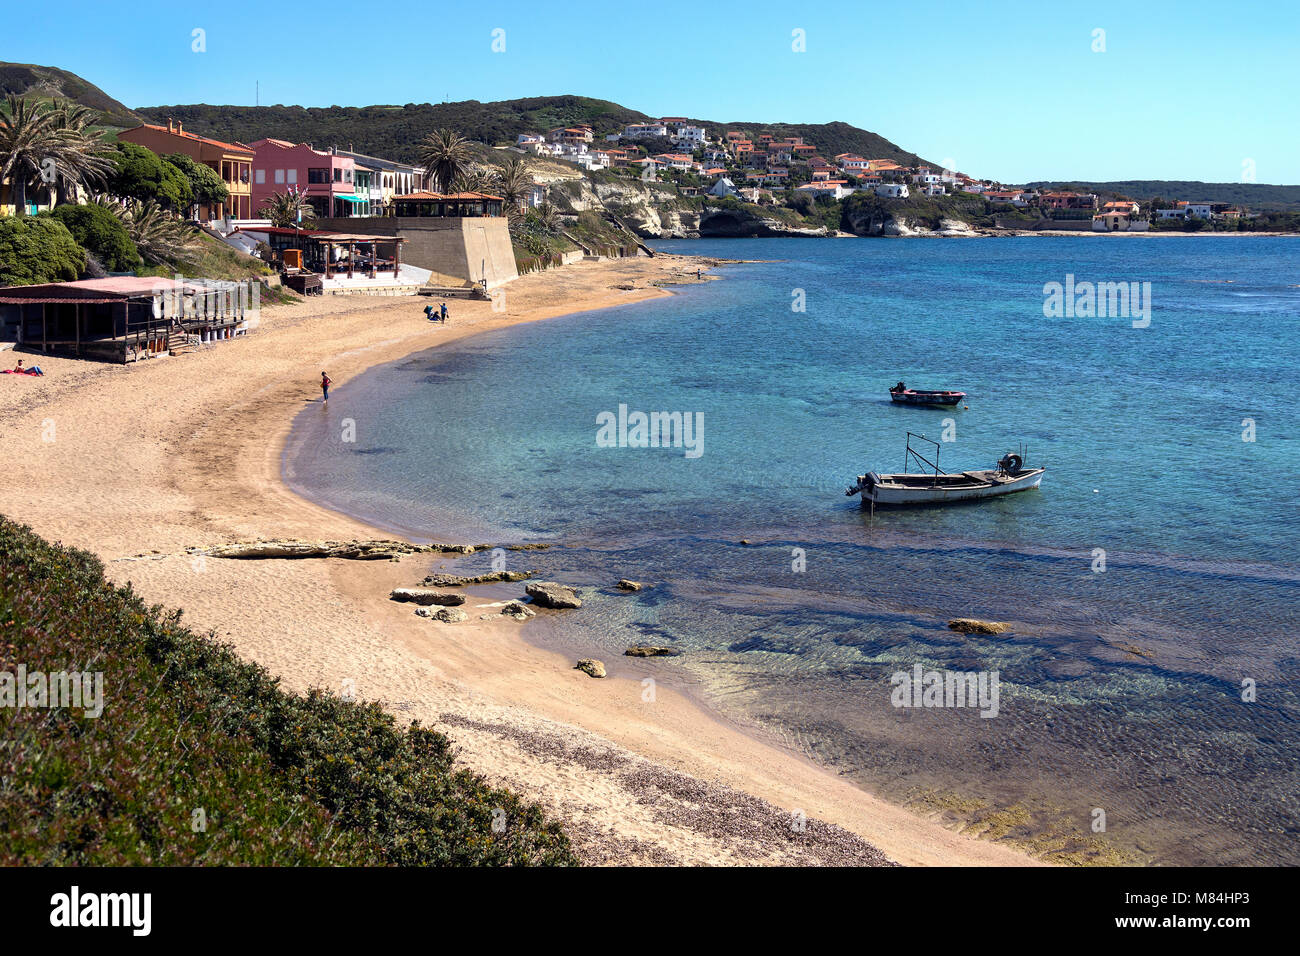 S'Archittu - a small coastal town near Oristano on the west coast of Sardinia, Italy. The town takes its name from the nearby natural arch. Stock Photo